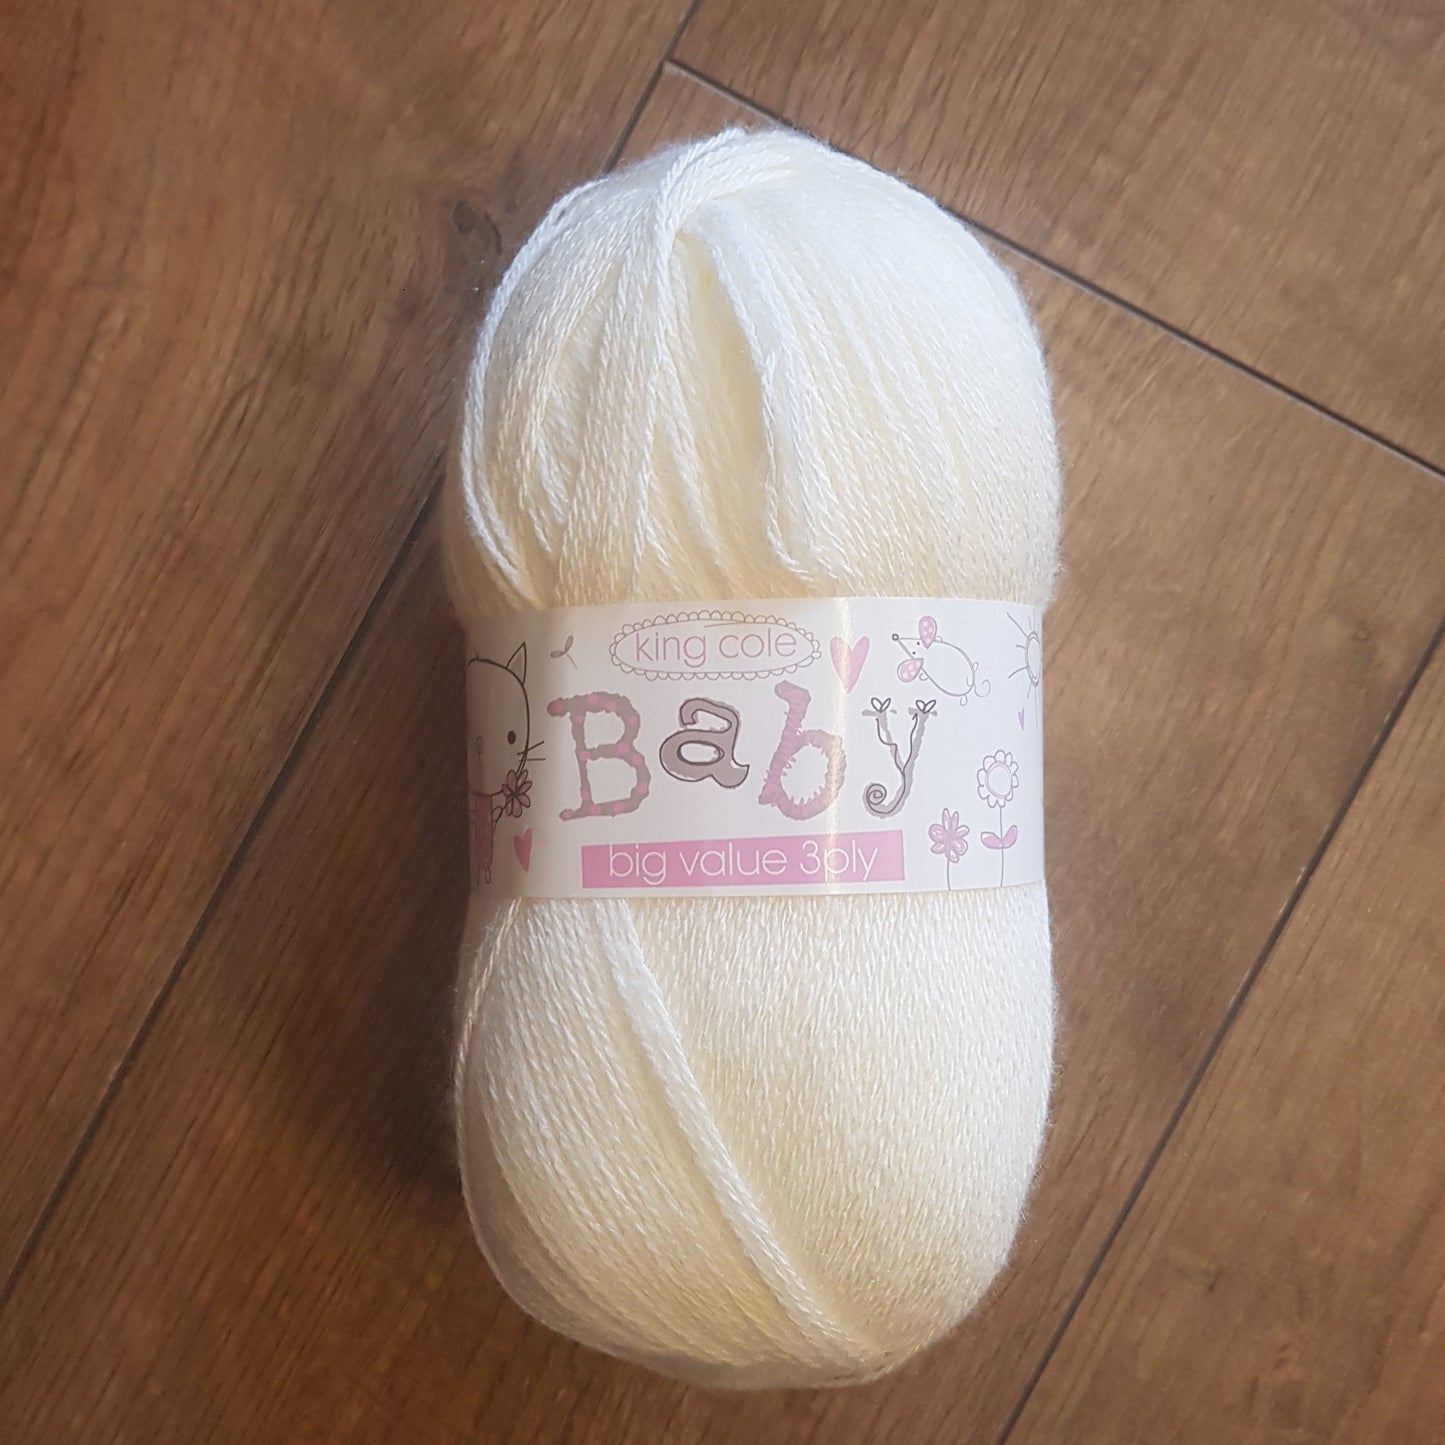 King Cole Big Value Baby 3ply Wool 100g - Various Shades